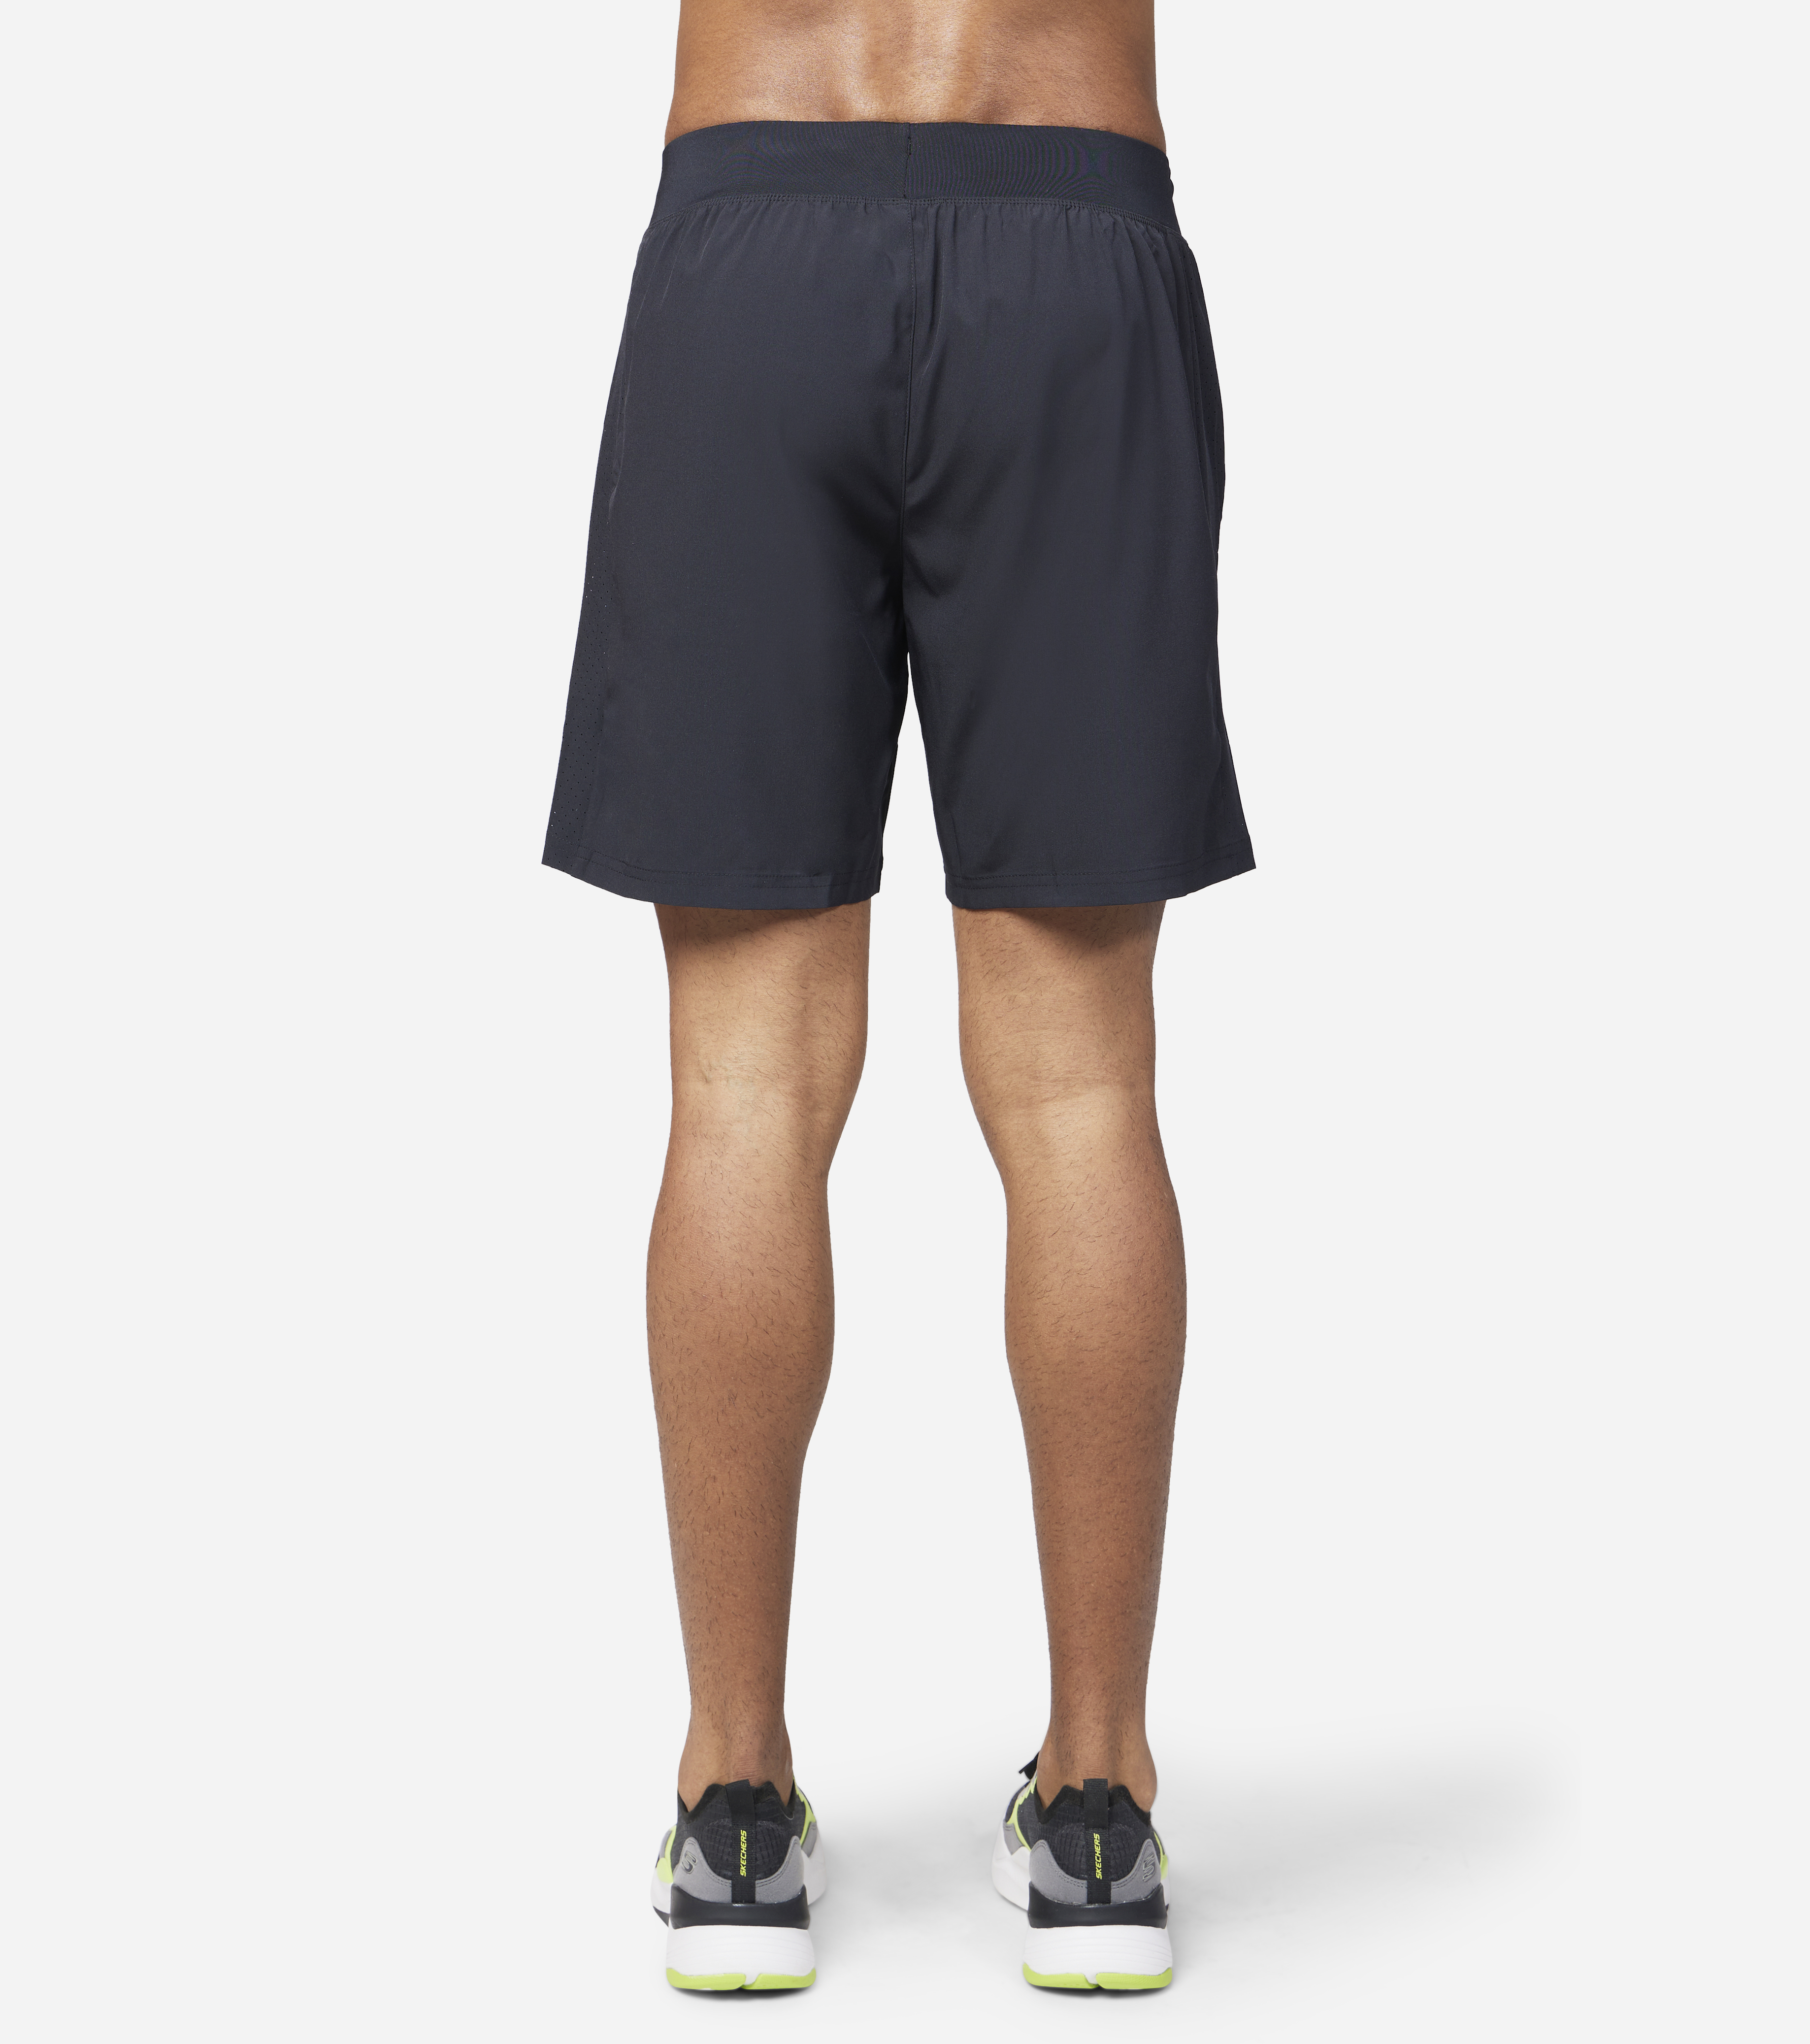 Momentum 7 Inch Shorts - No Liner - Bucked Up